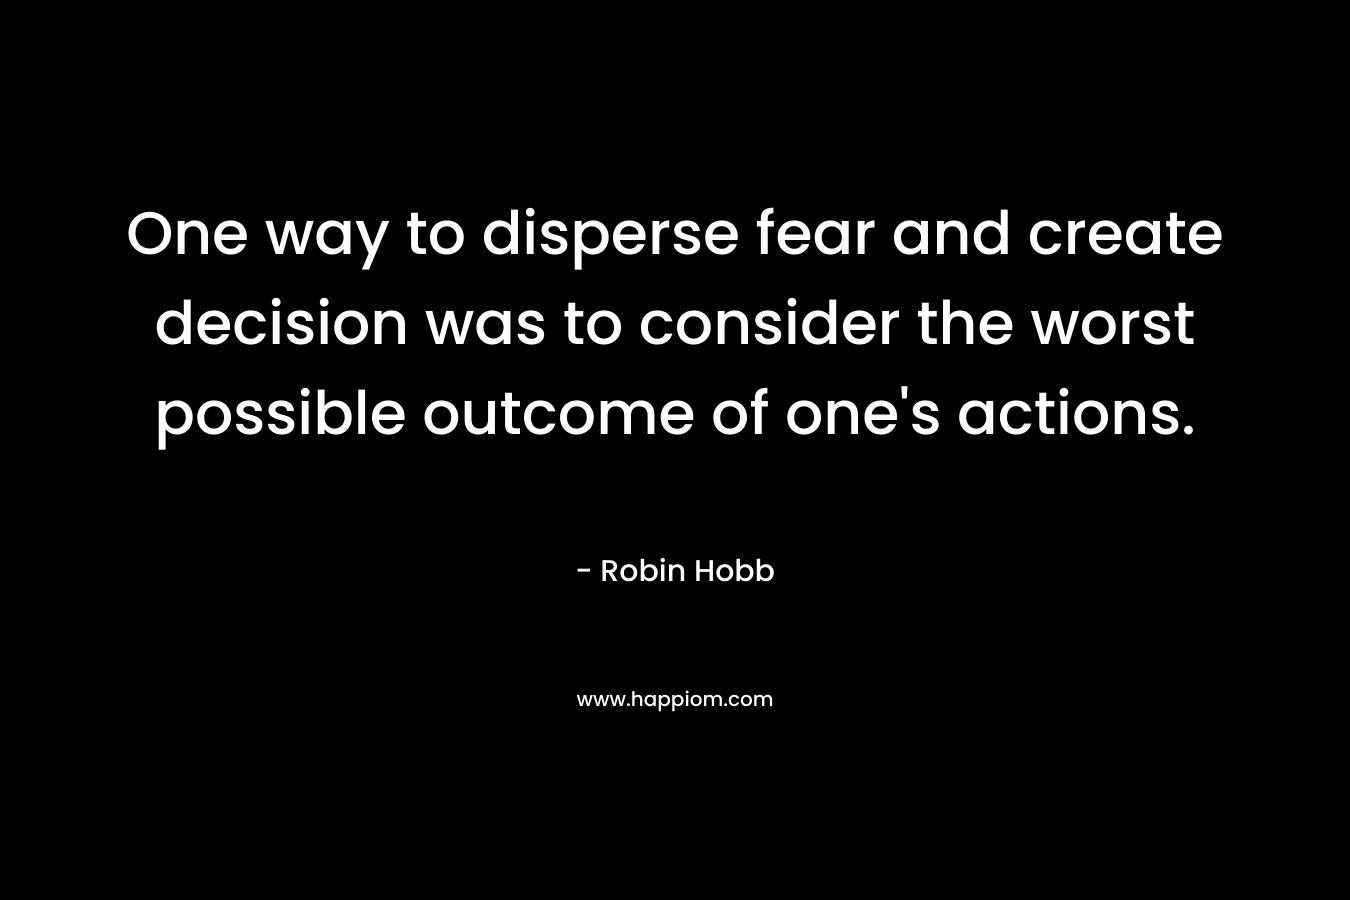 One way to disperse fear and create decision was to consider the worst possible outcome of one's actions.